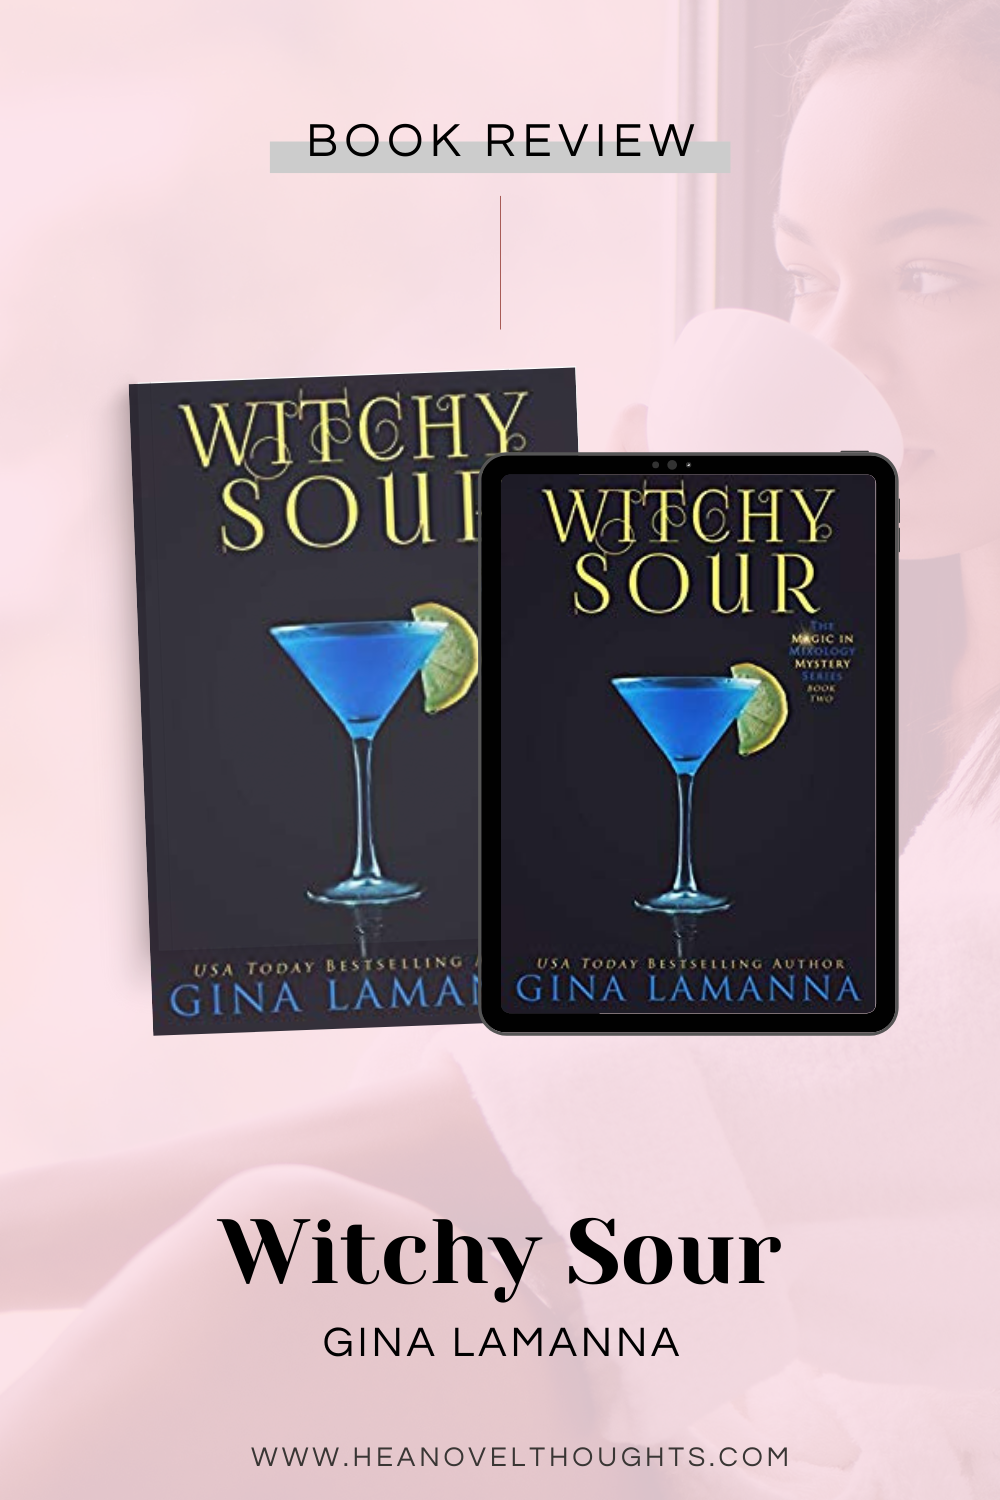 Witchy Sour by Gina Lamanna